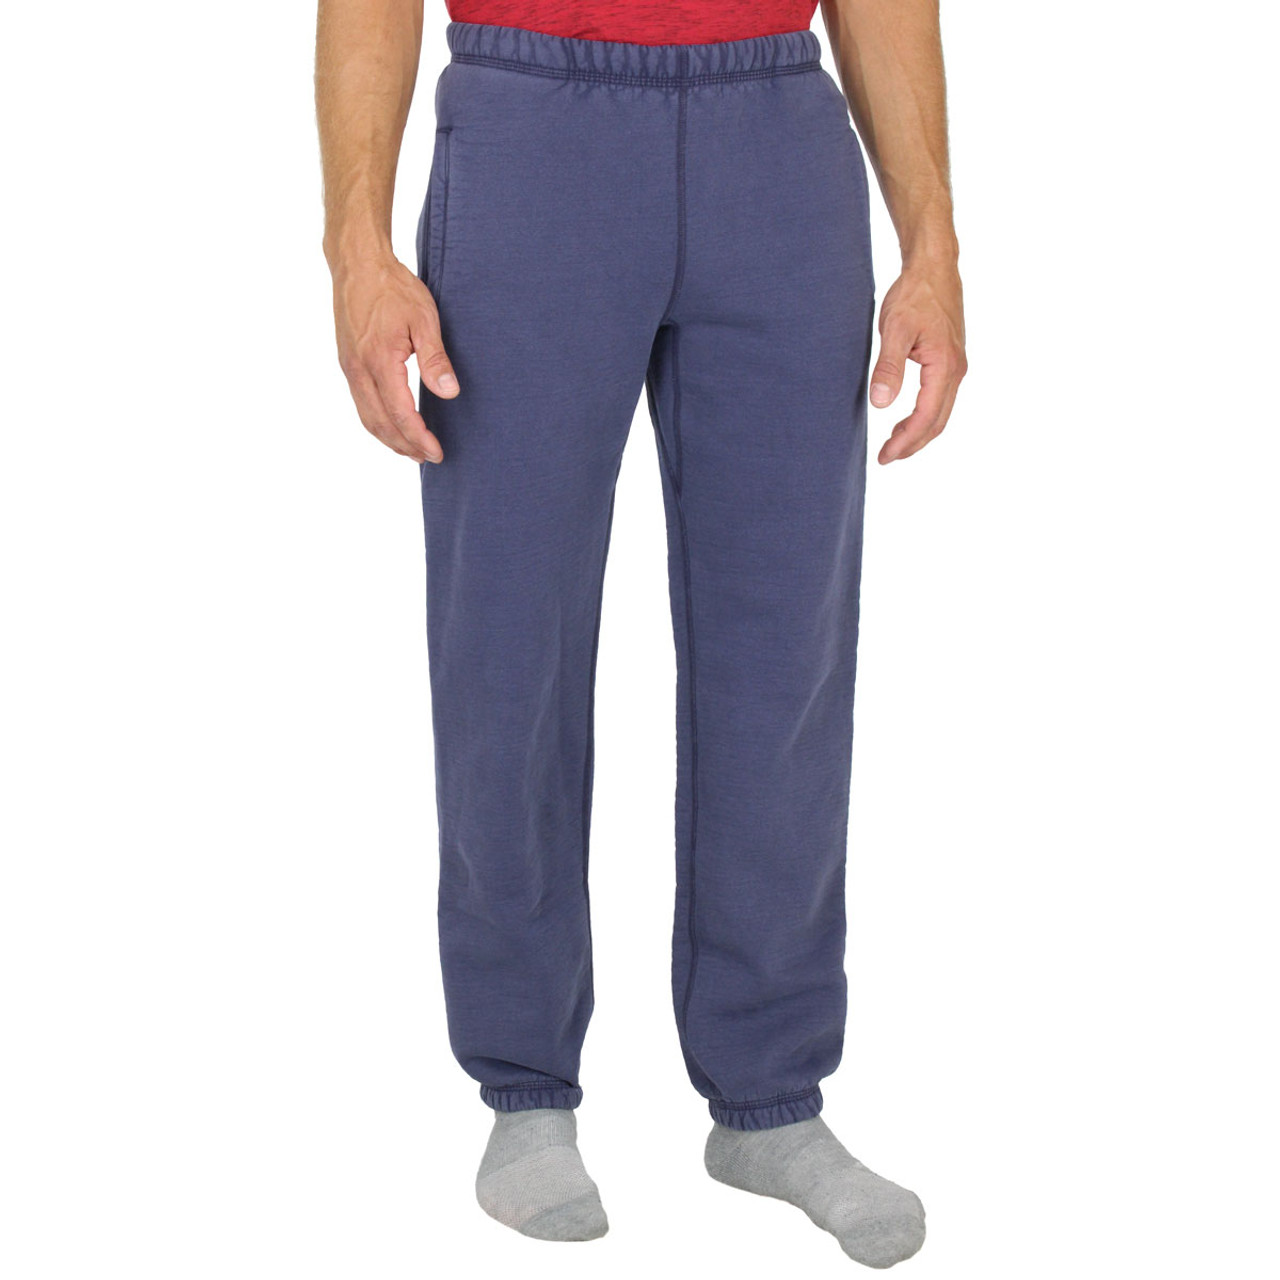 THICK 100% All-Cotton CUFFED SWEATPANTS for MEN